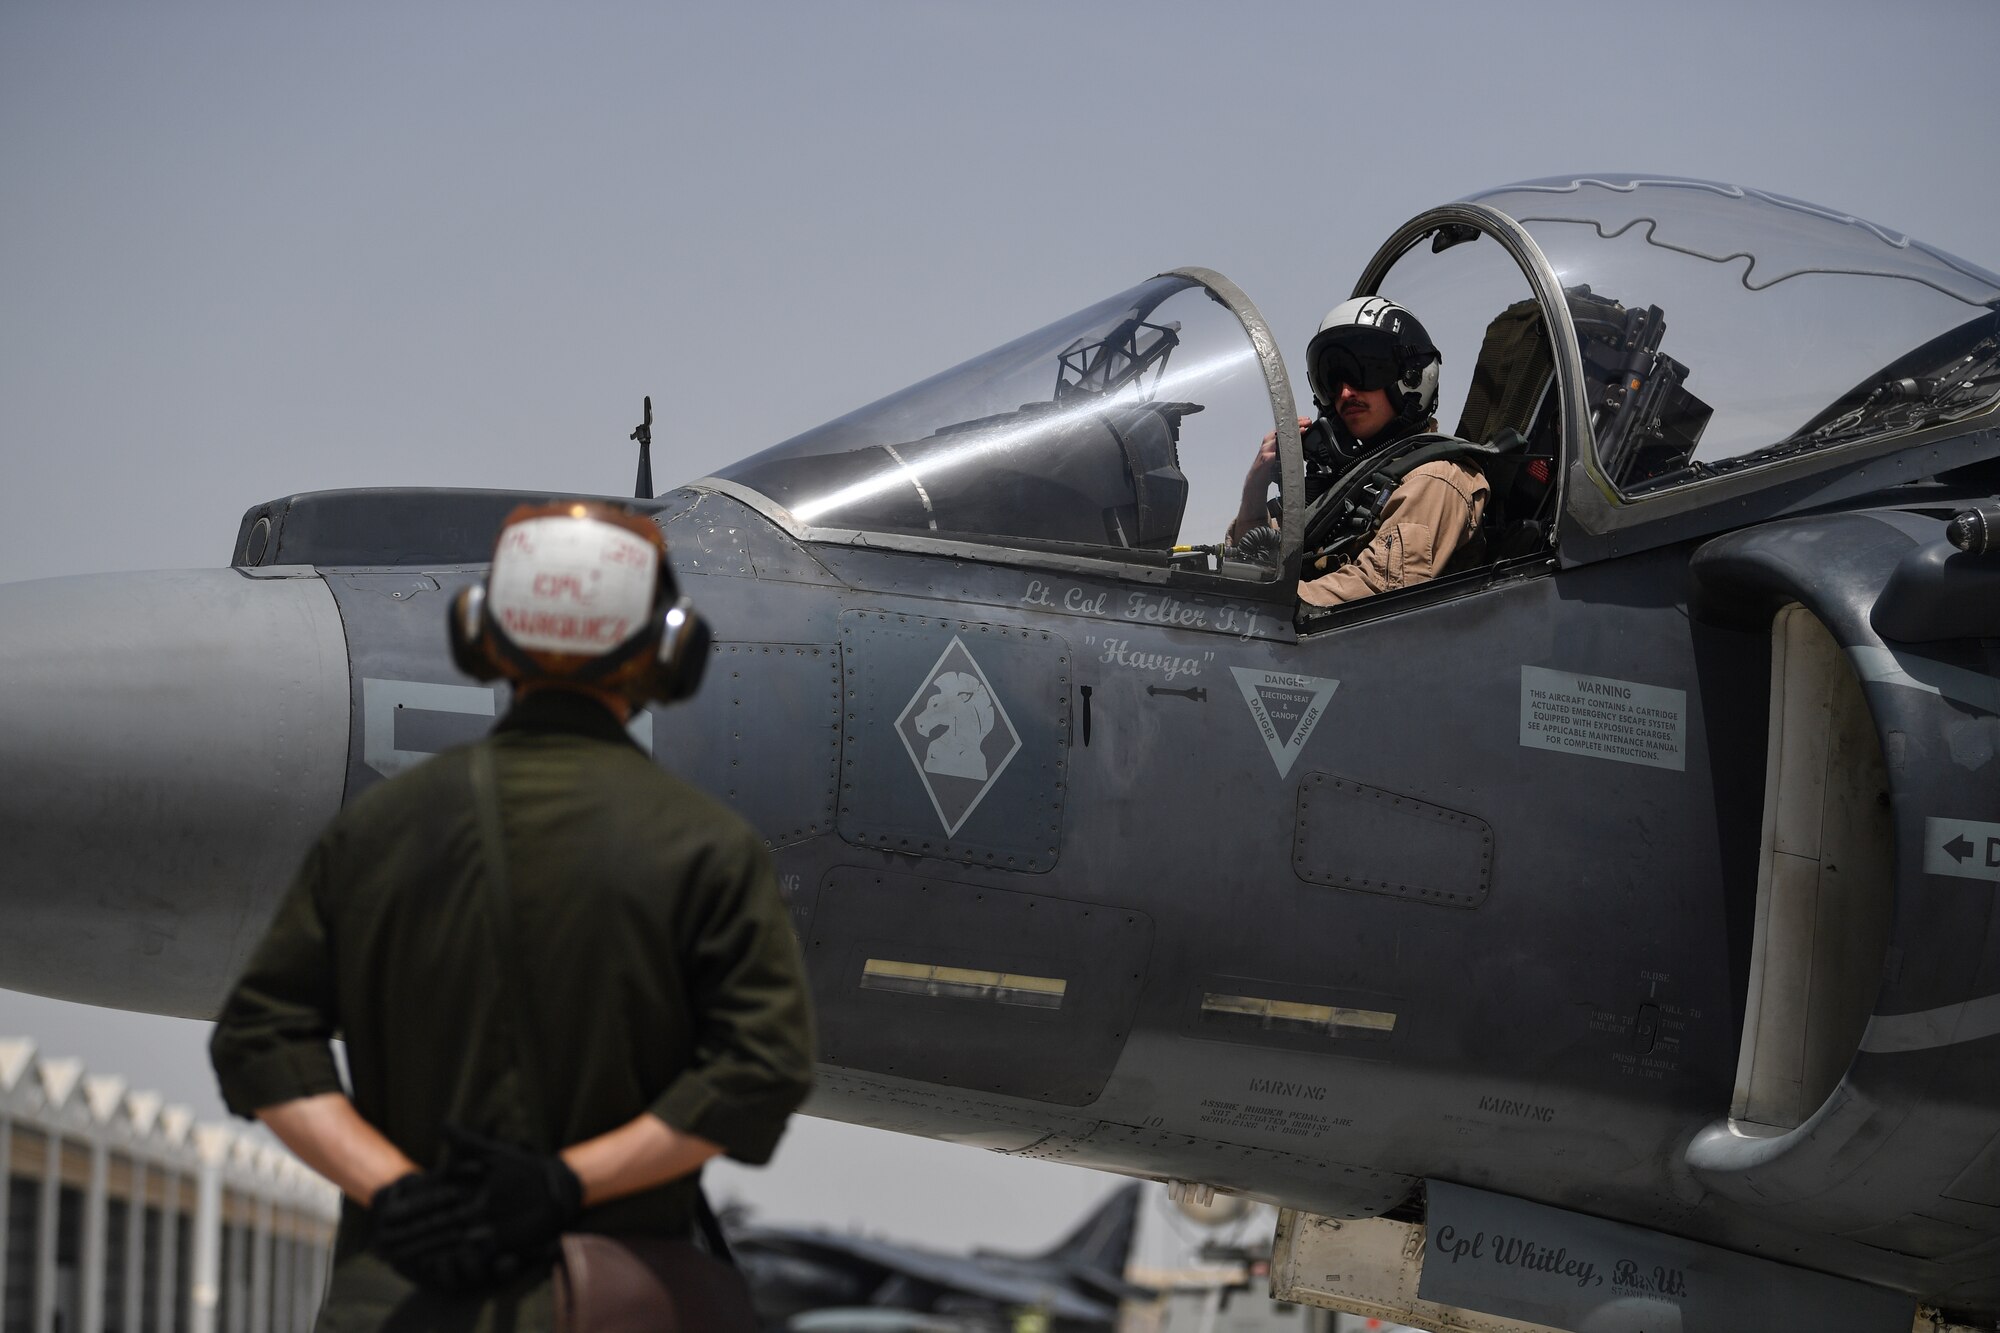 Two U.S. Marines conduct pre-flight checks on an AV-8B Harrier II during Desert Flag 19-2 in Southwest Asia, April 28, 2019. Desert Flag is designed to exercise combined Air Forces in military operations to enhance competence and strengthen military-to-military relationships and regional security.